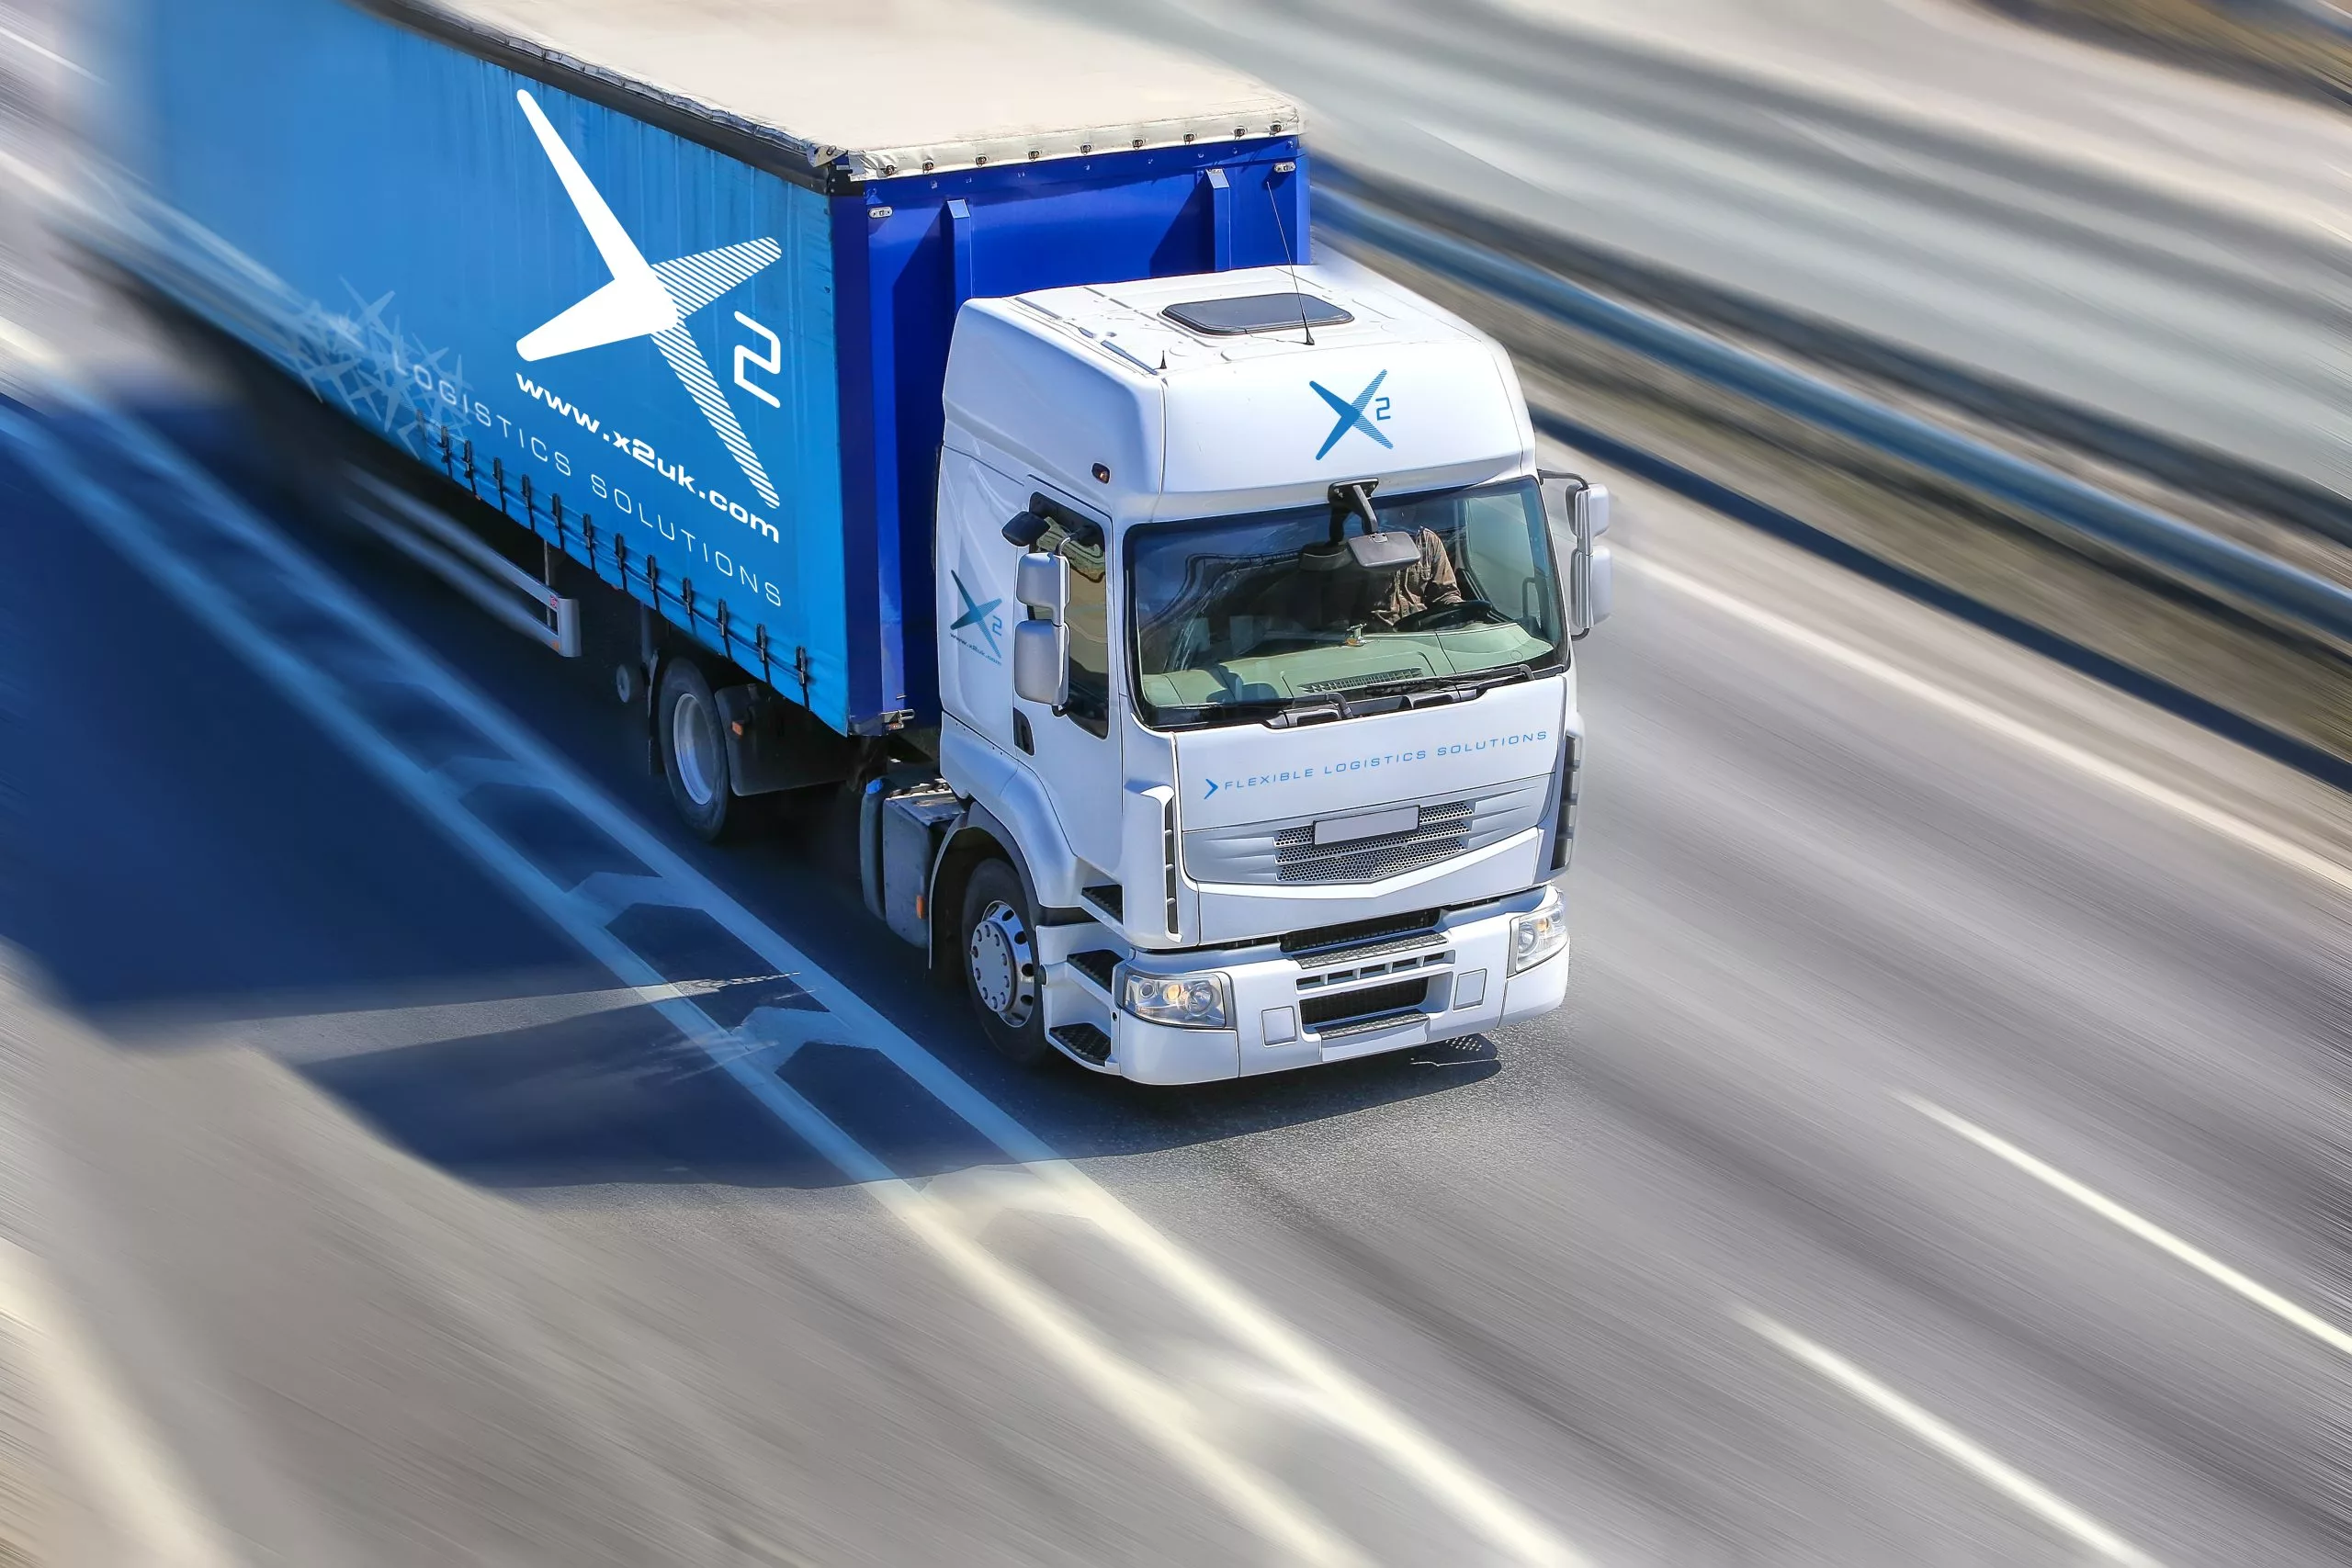 Scaling Your Logistics Capabilities by a Factor of X2